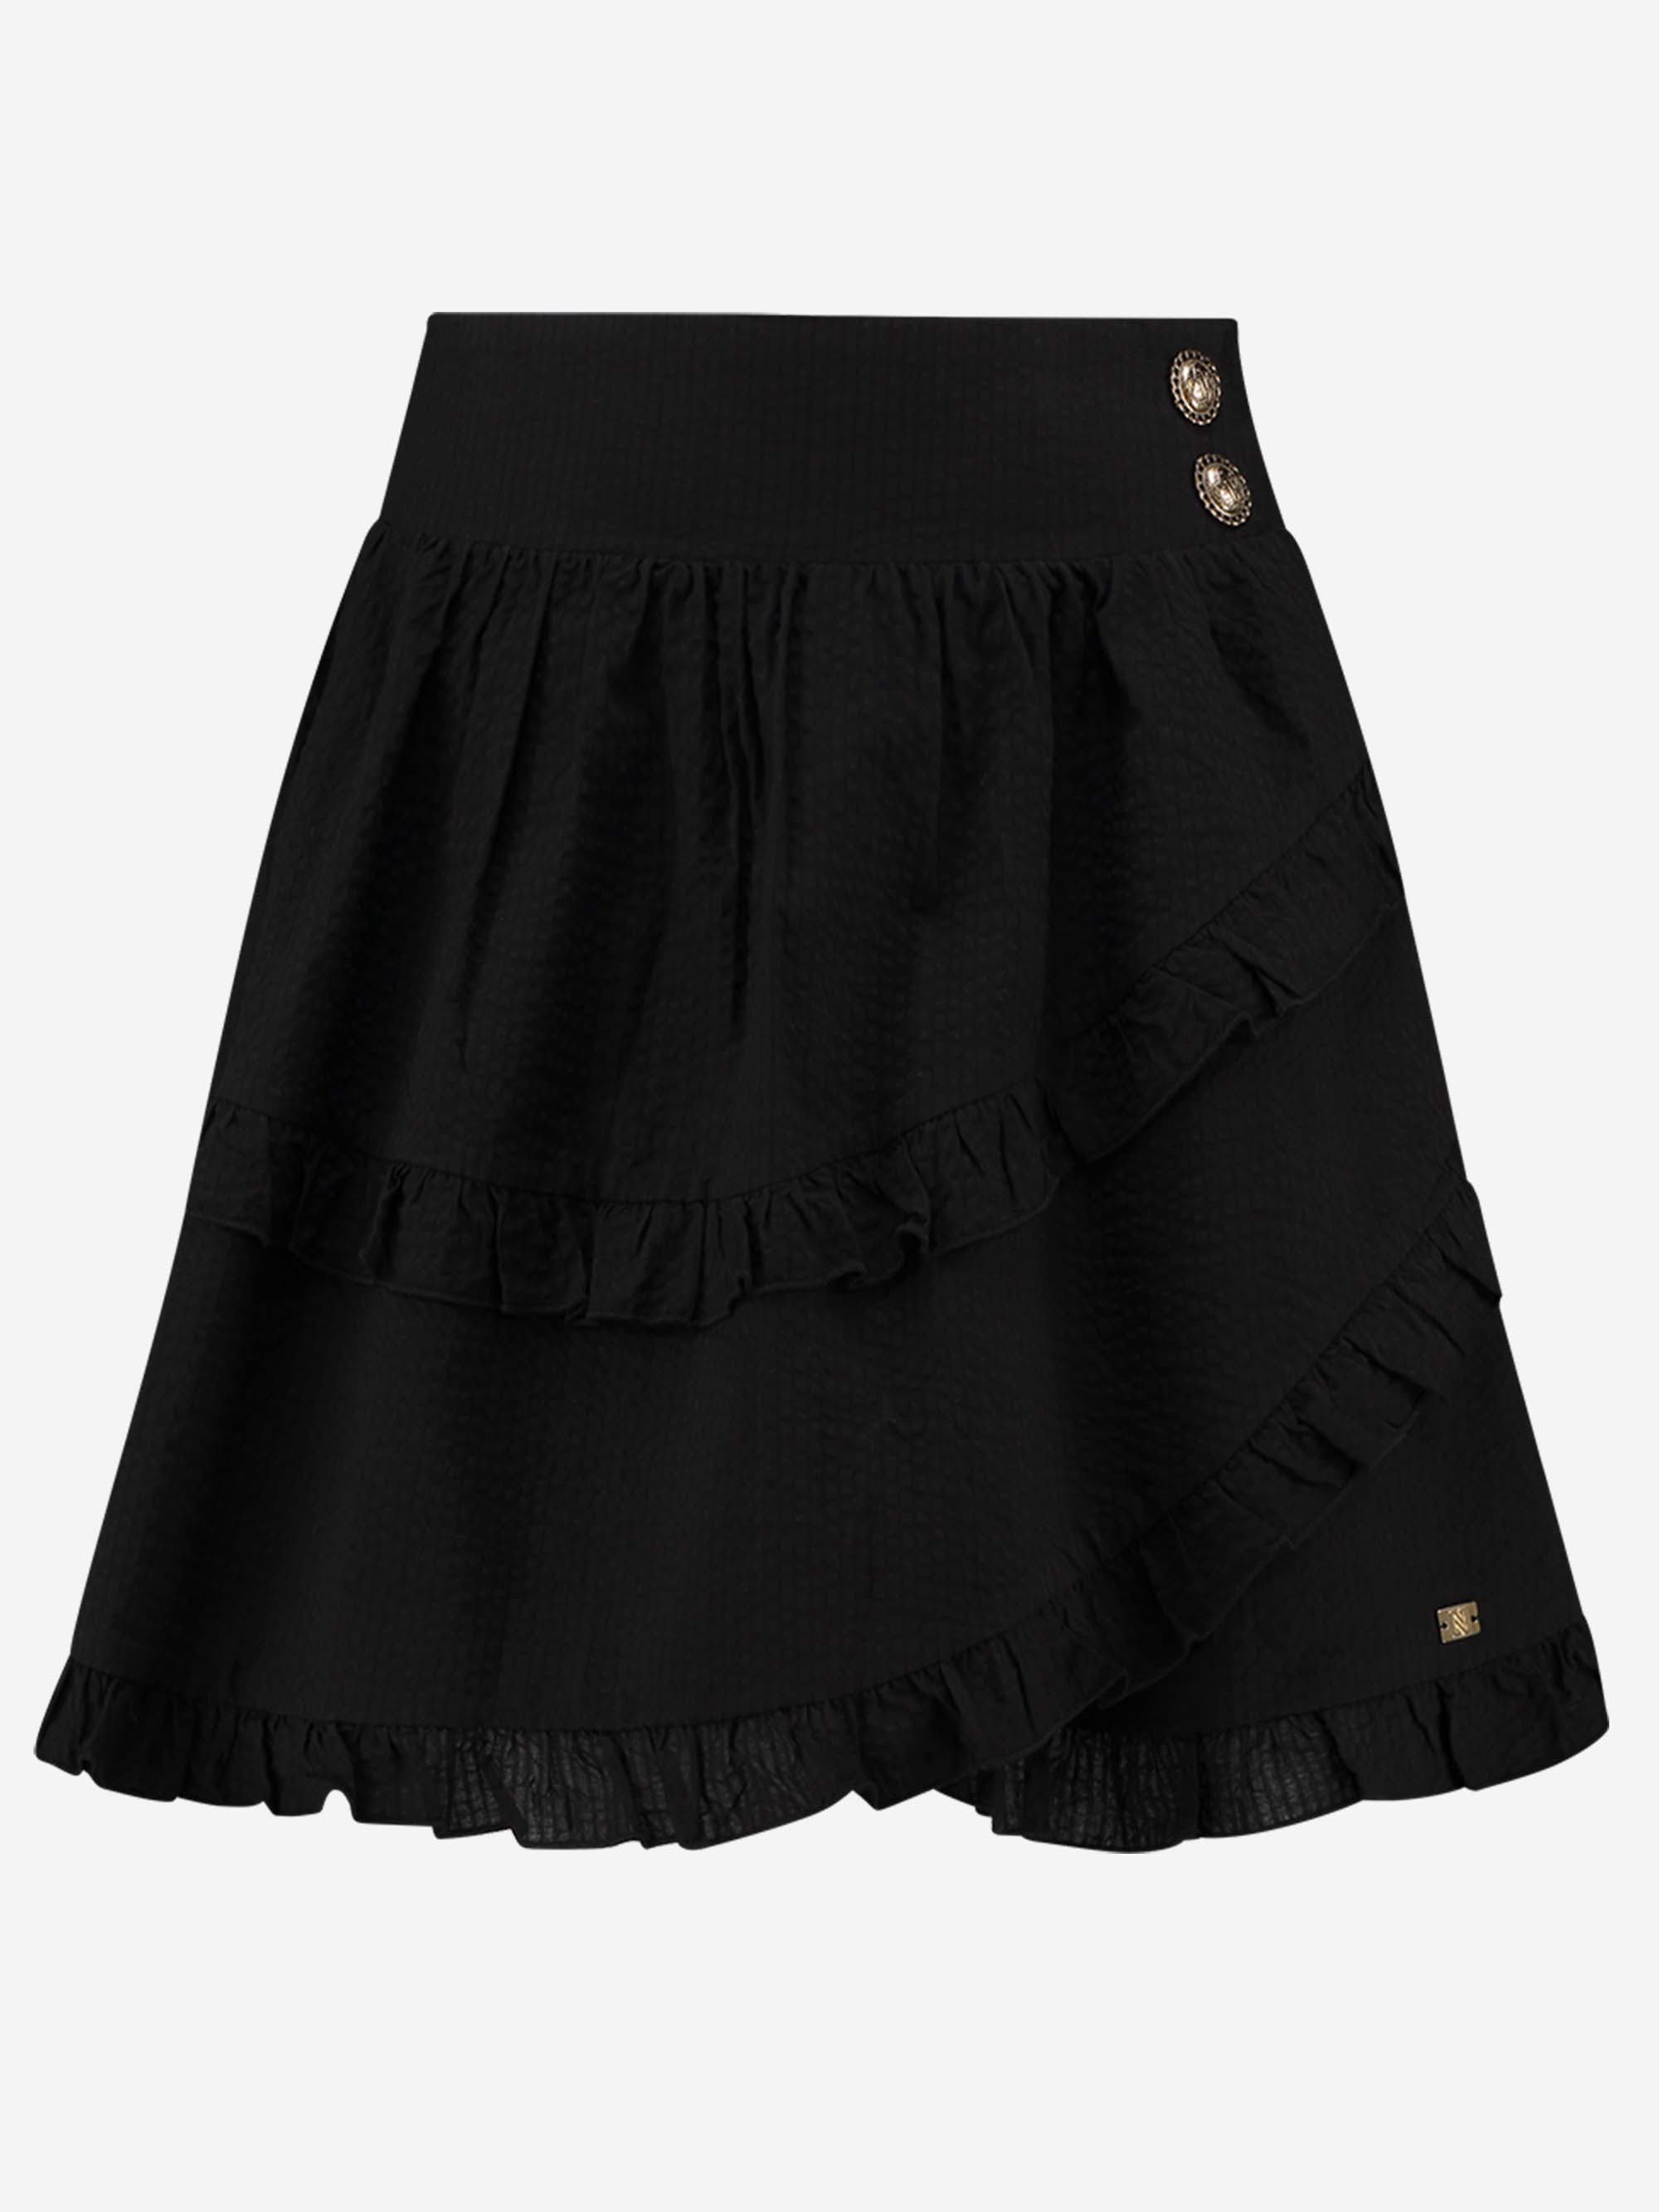 A-line skirt with ruffles and elastic waistband